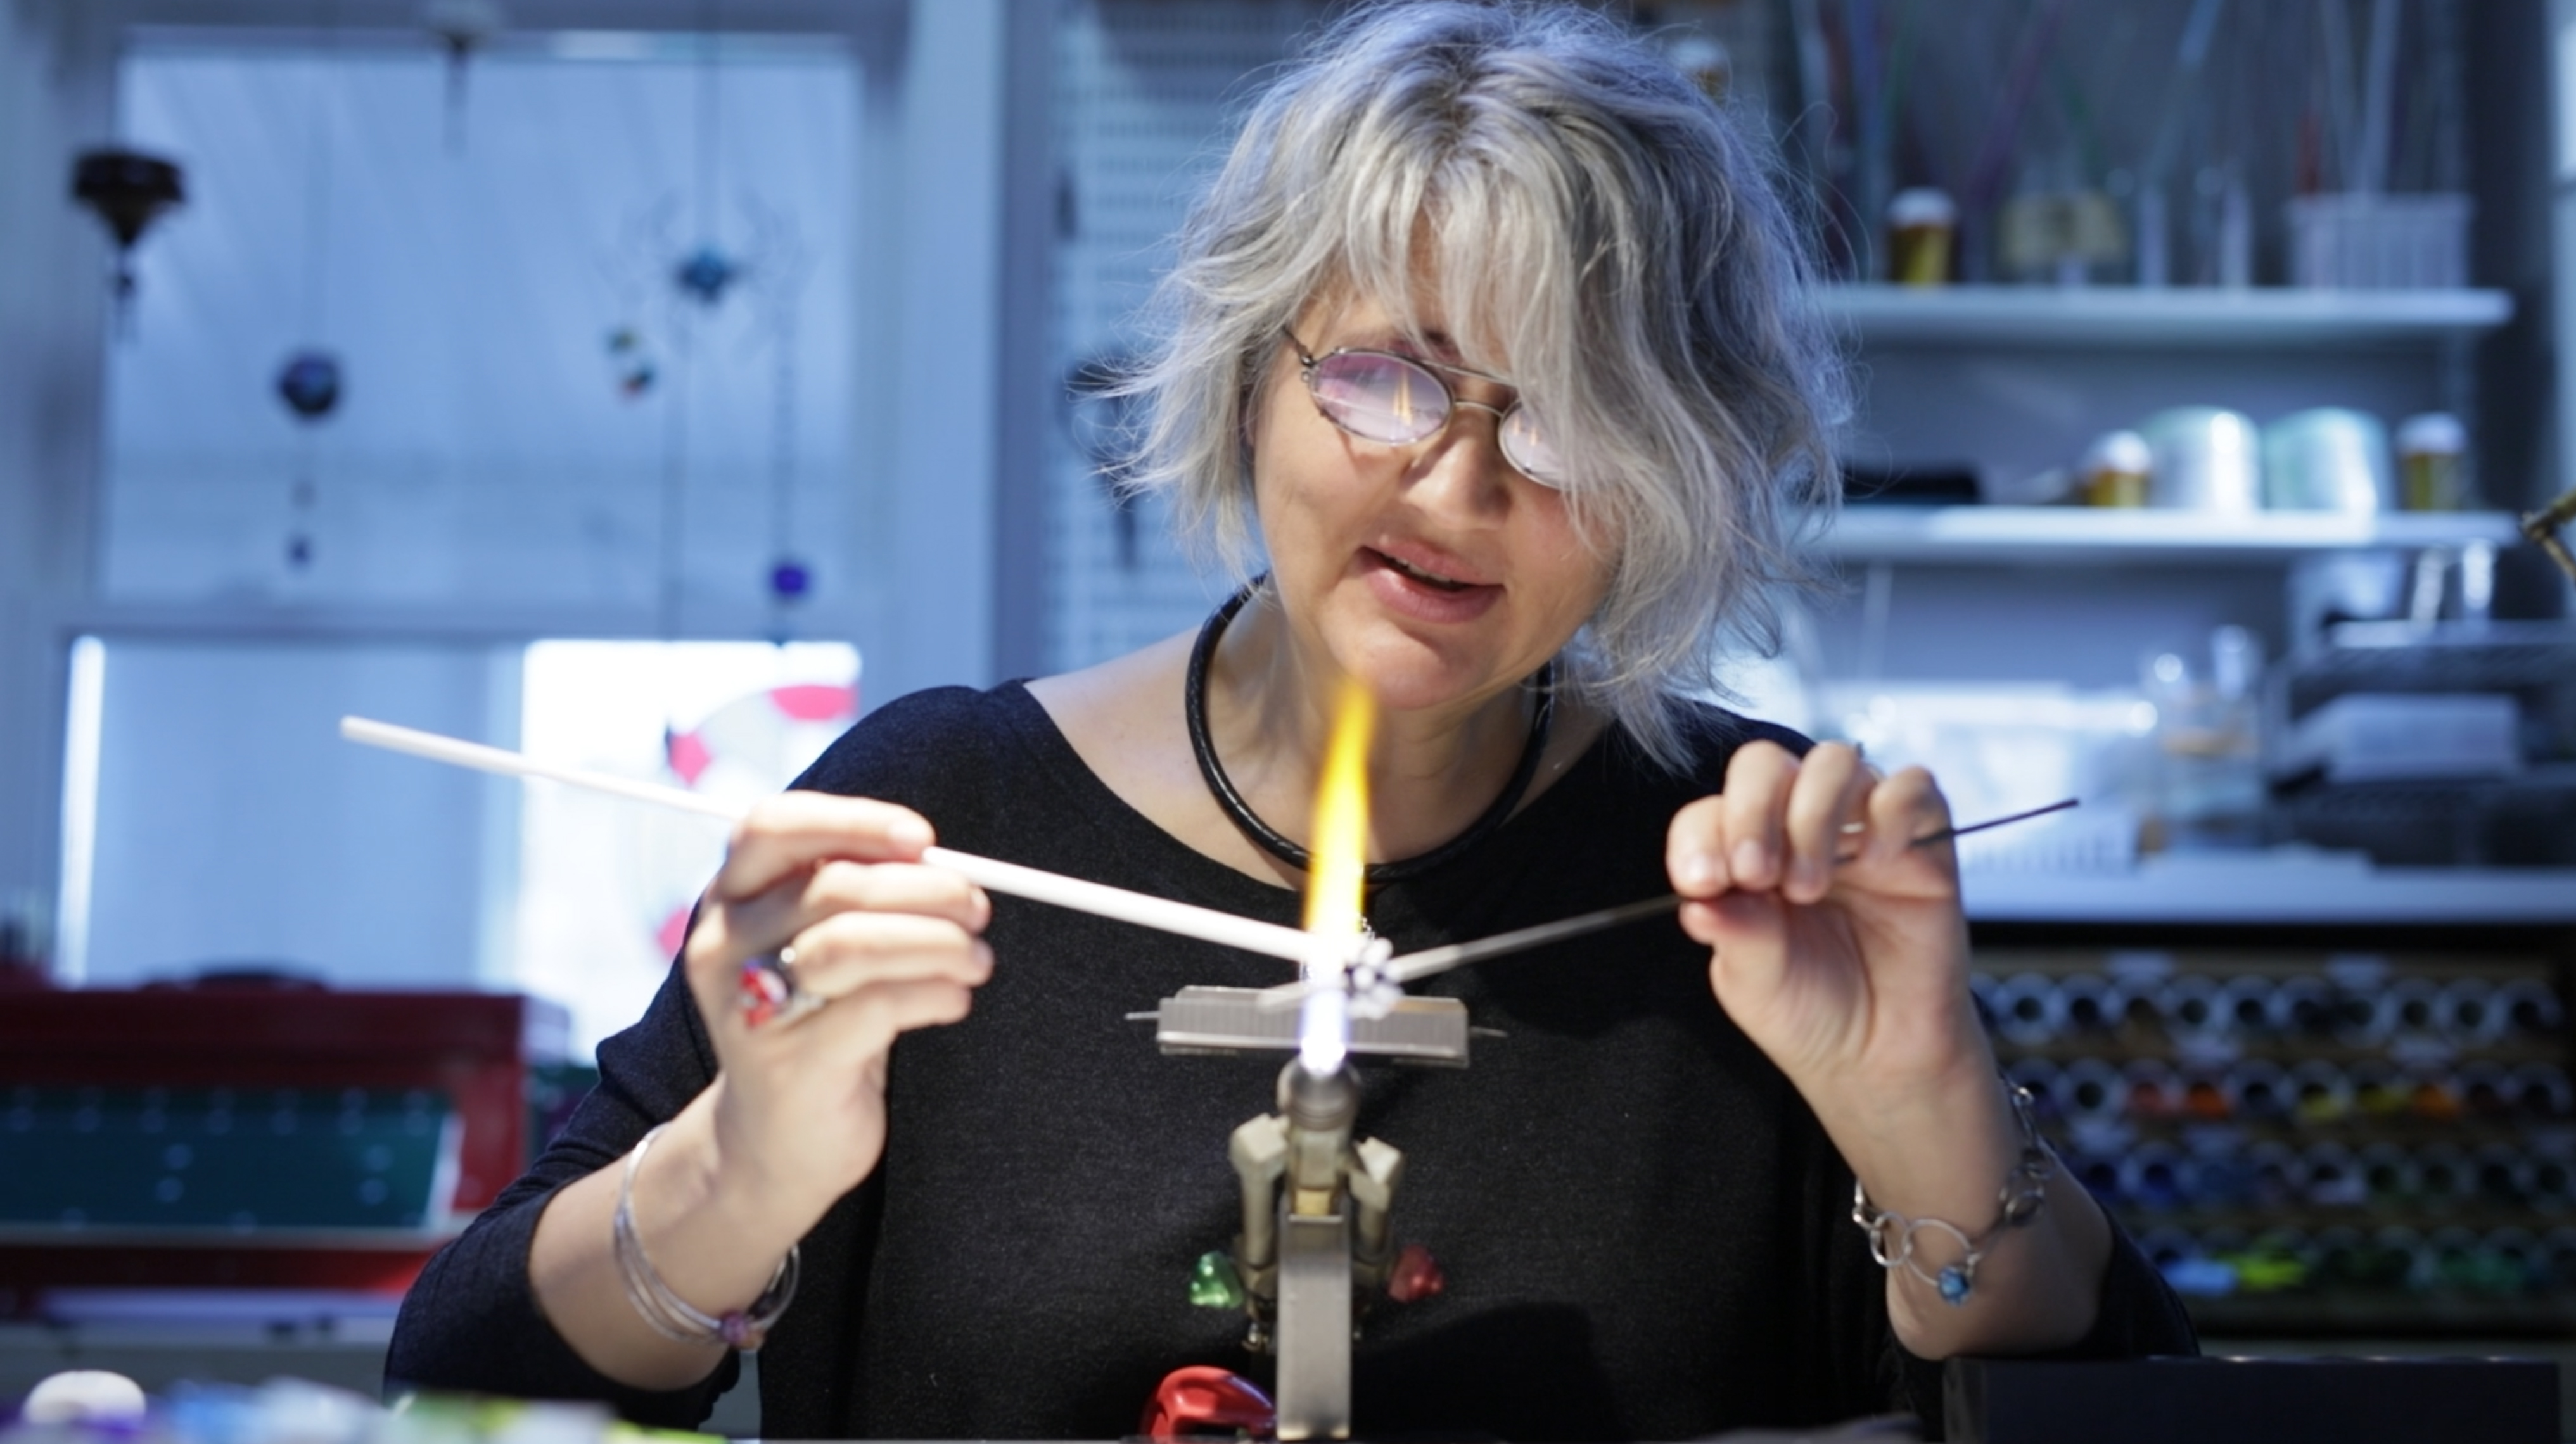 Liliana Glenn is creating her art glass objects at the torch. Photo by Oliver Thom, www.ojrtphotography.com